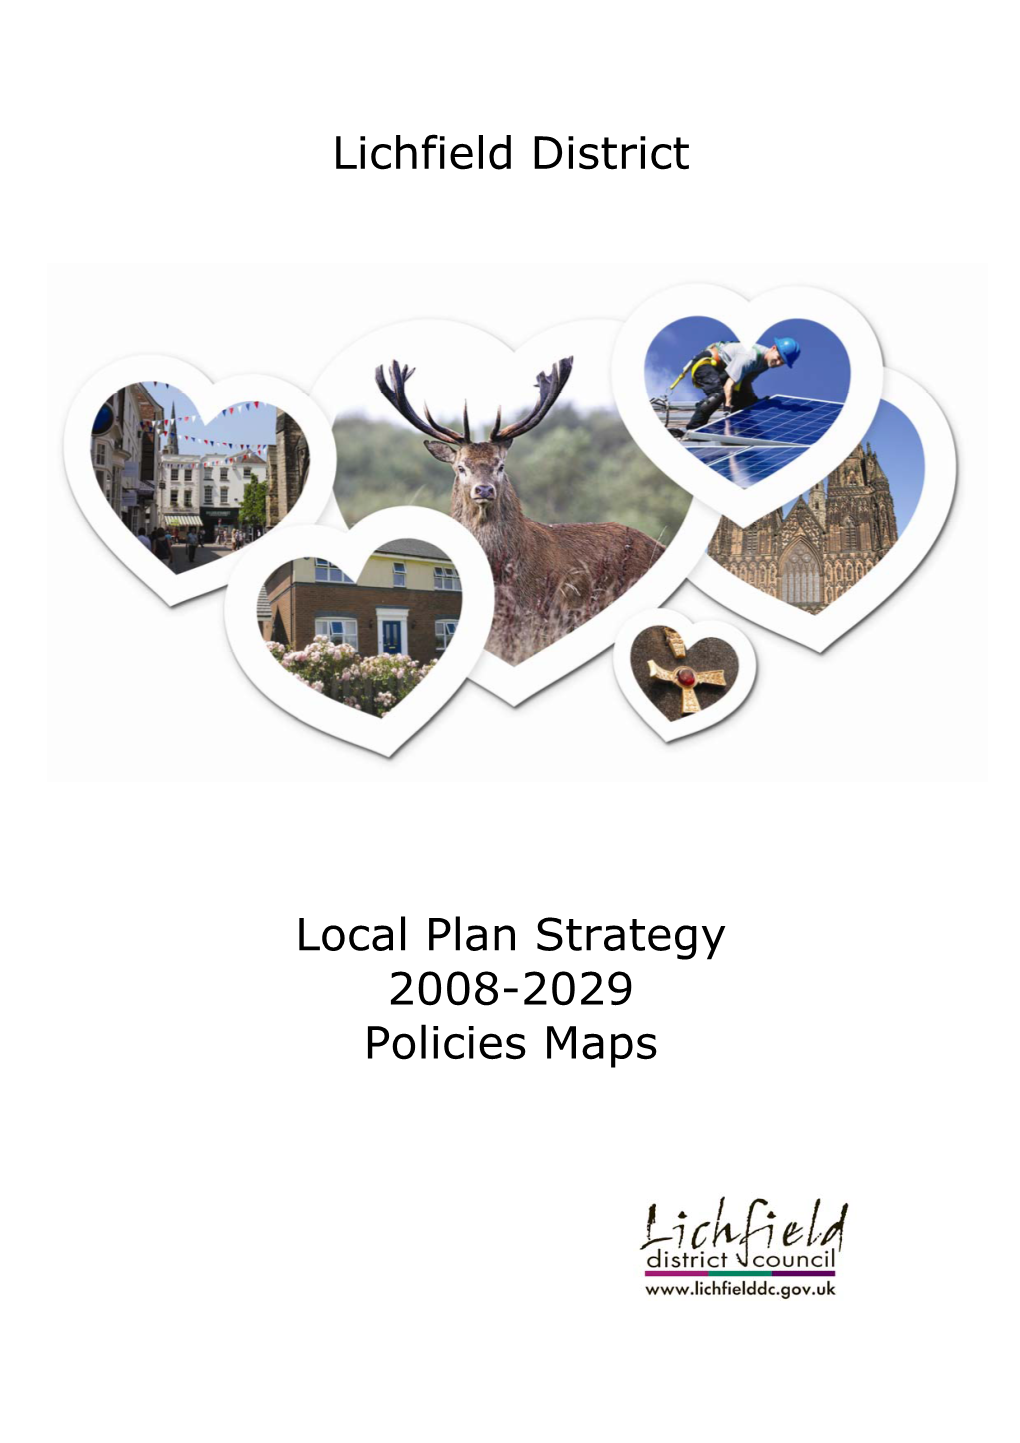 Lichfield District Local Plan Strategy 2008-2029 Policies Maps